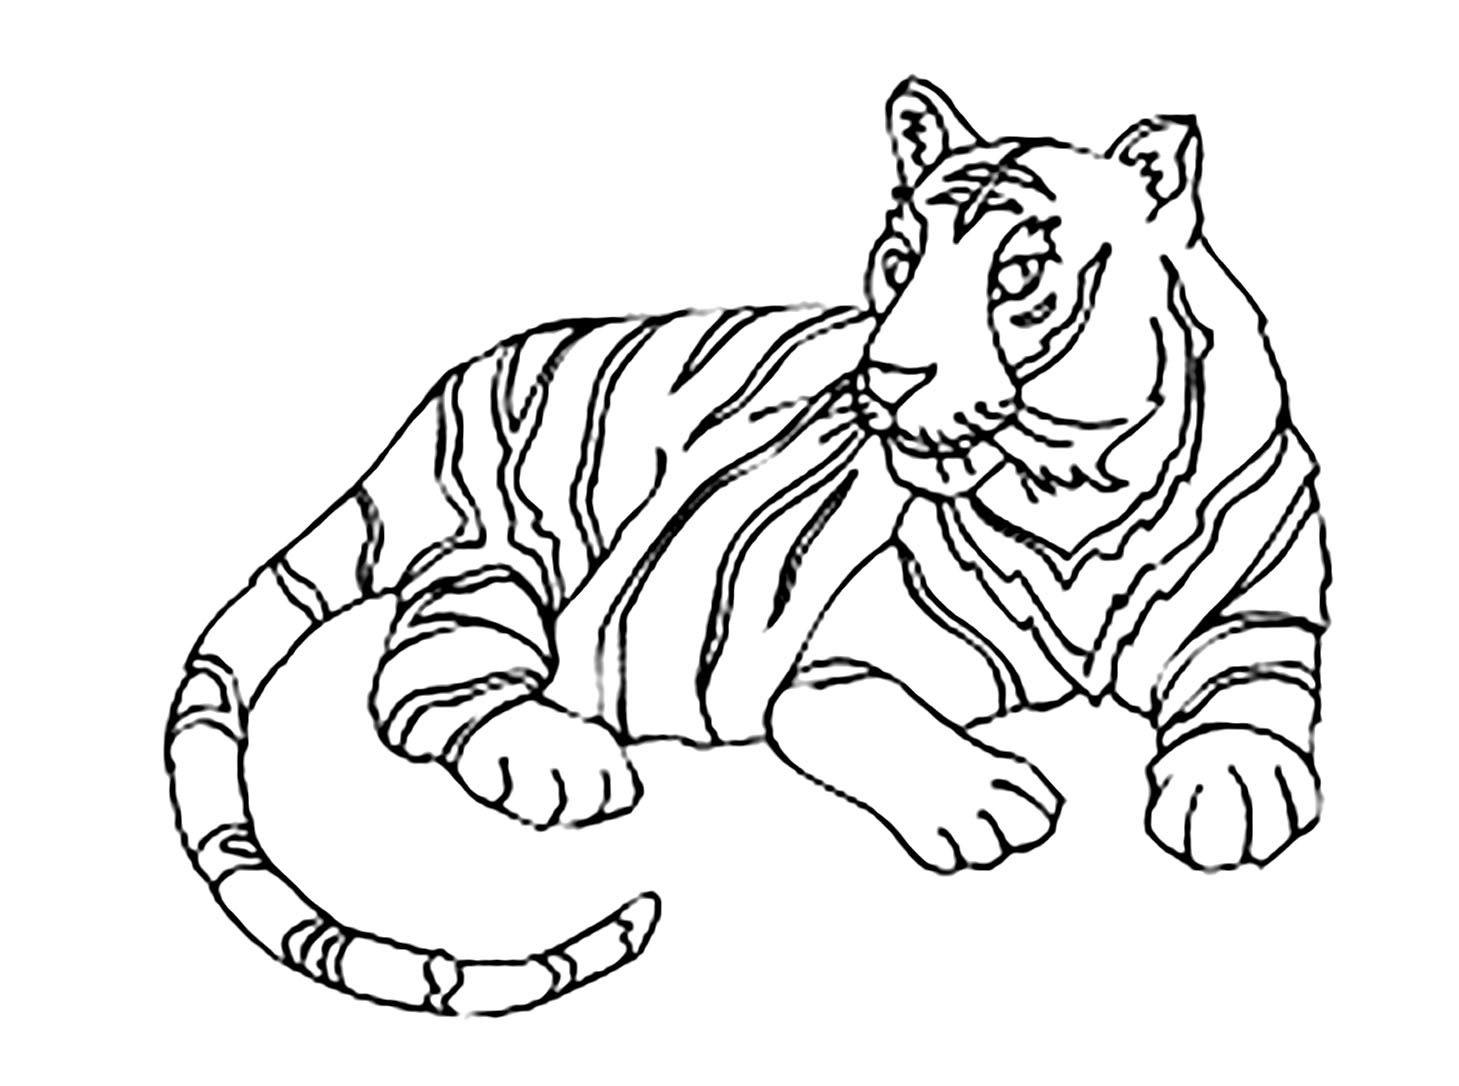 71 Printable Tiger Coloring Pages : Just Kids